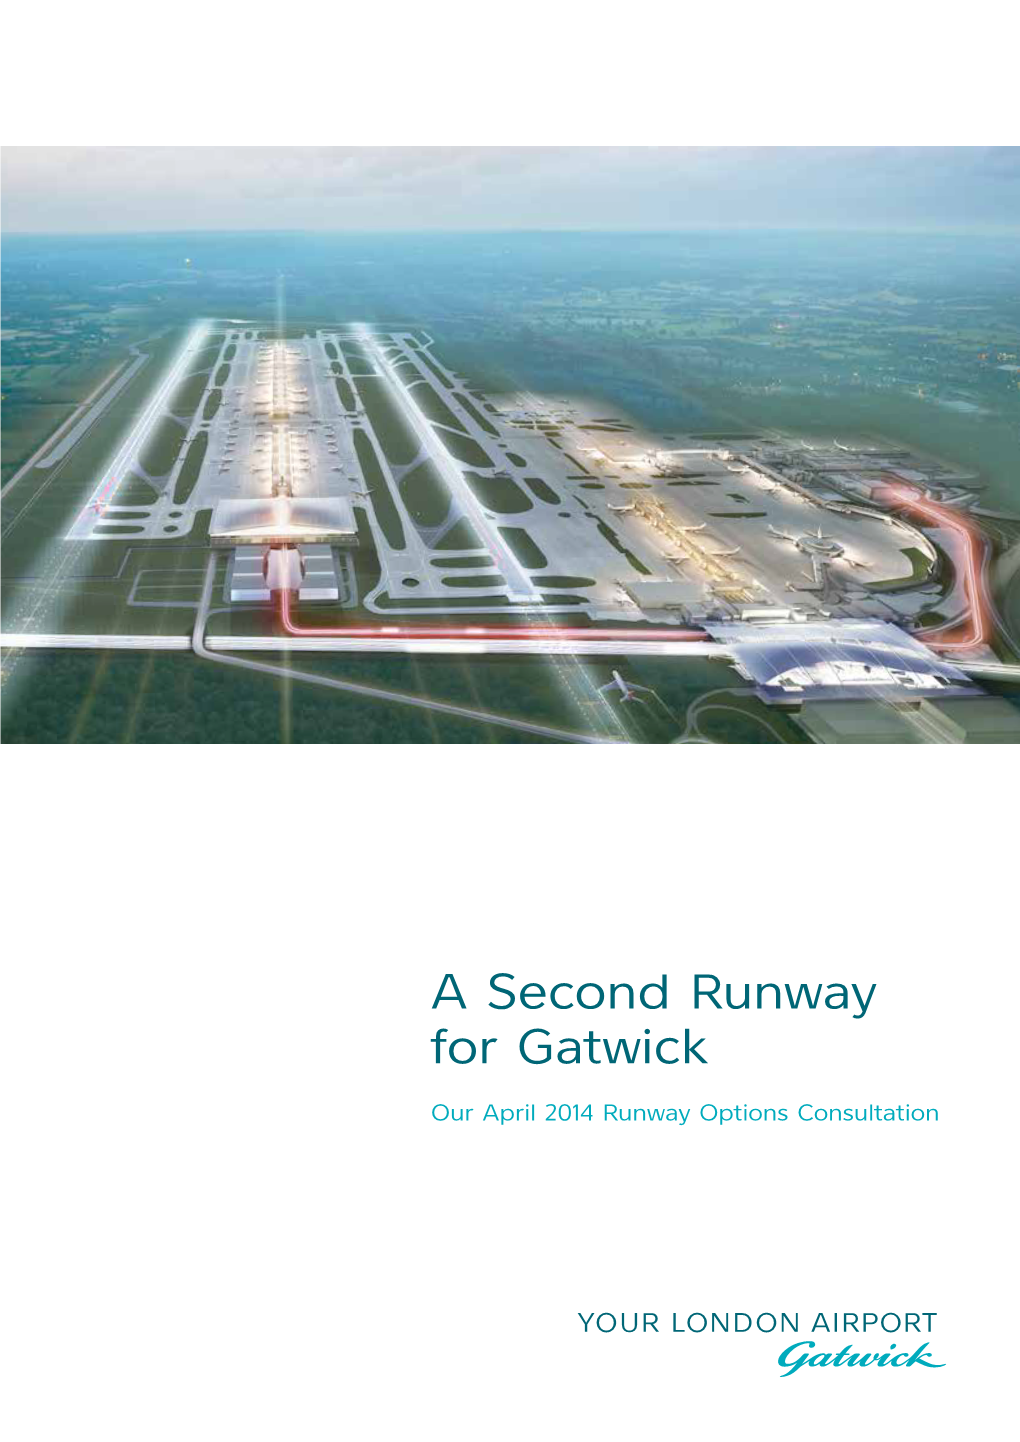 A Second Runway for Gatwick